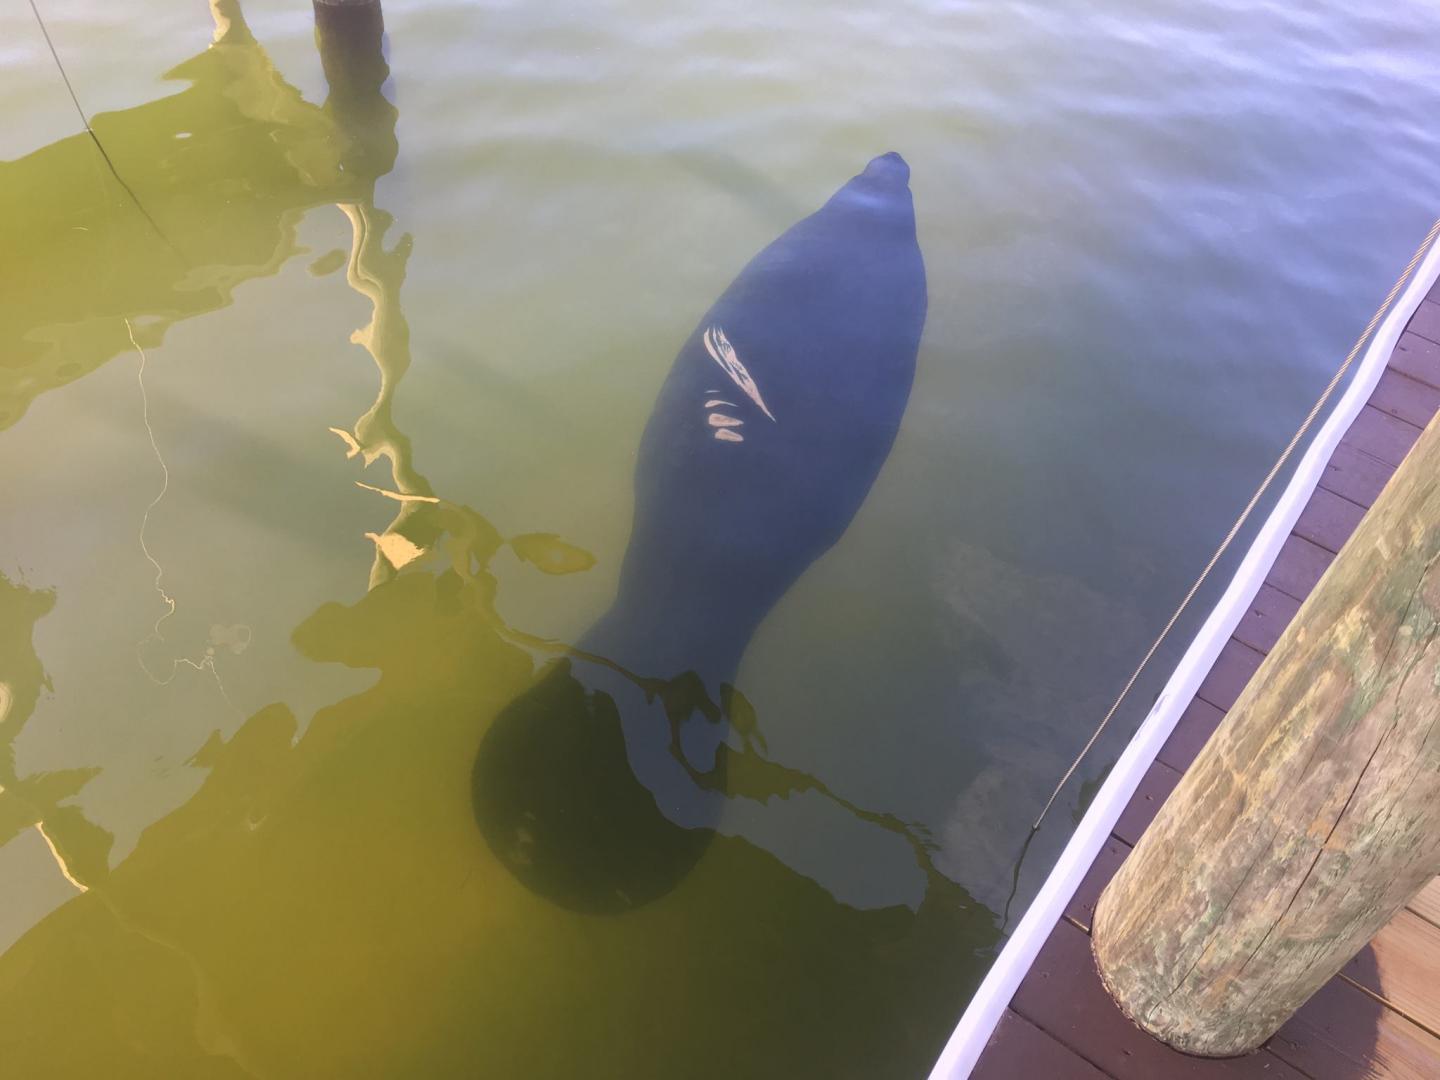 Manatee with Propeller Scar